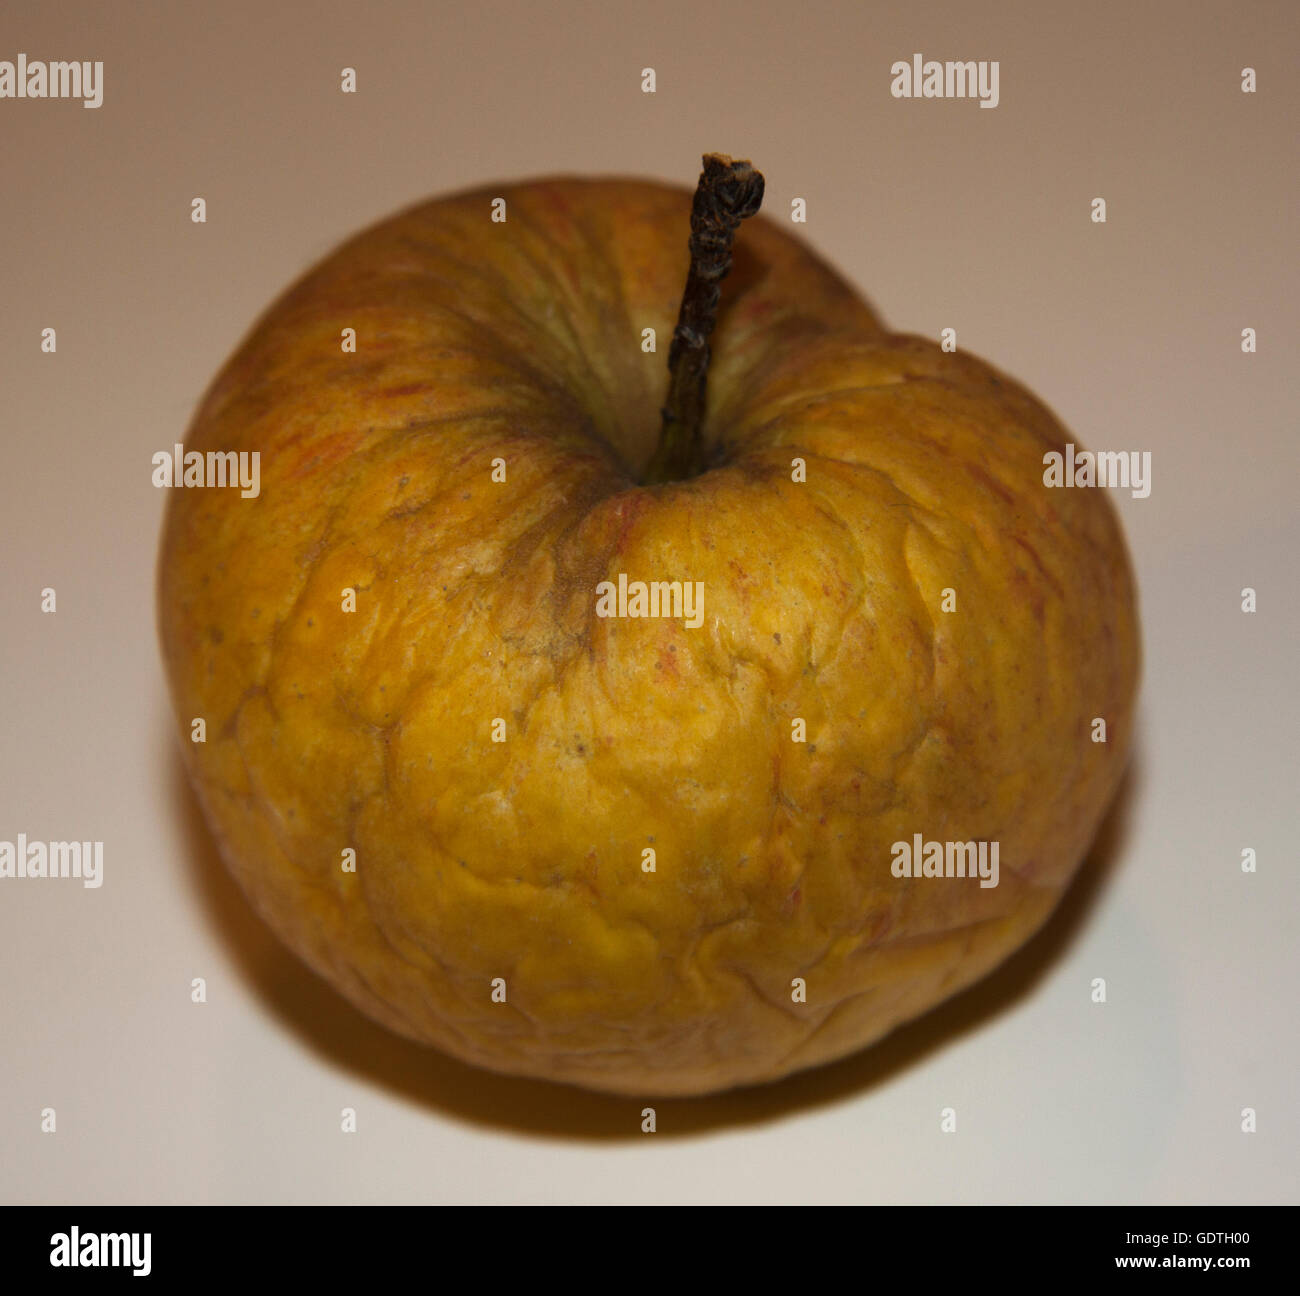 Golden Delicious apple left to dehydrate demonstrating wrinkles similar to aging human skin Stock Photo